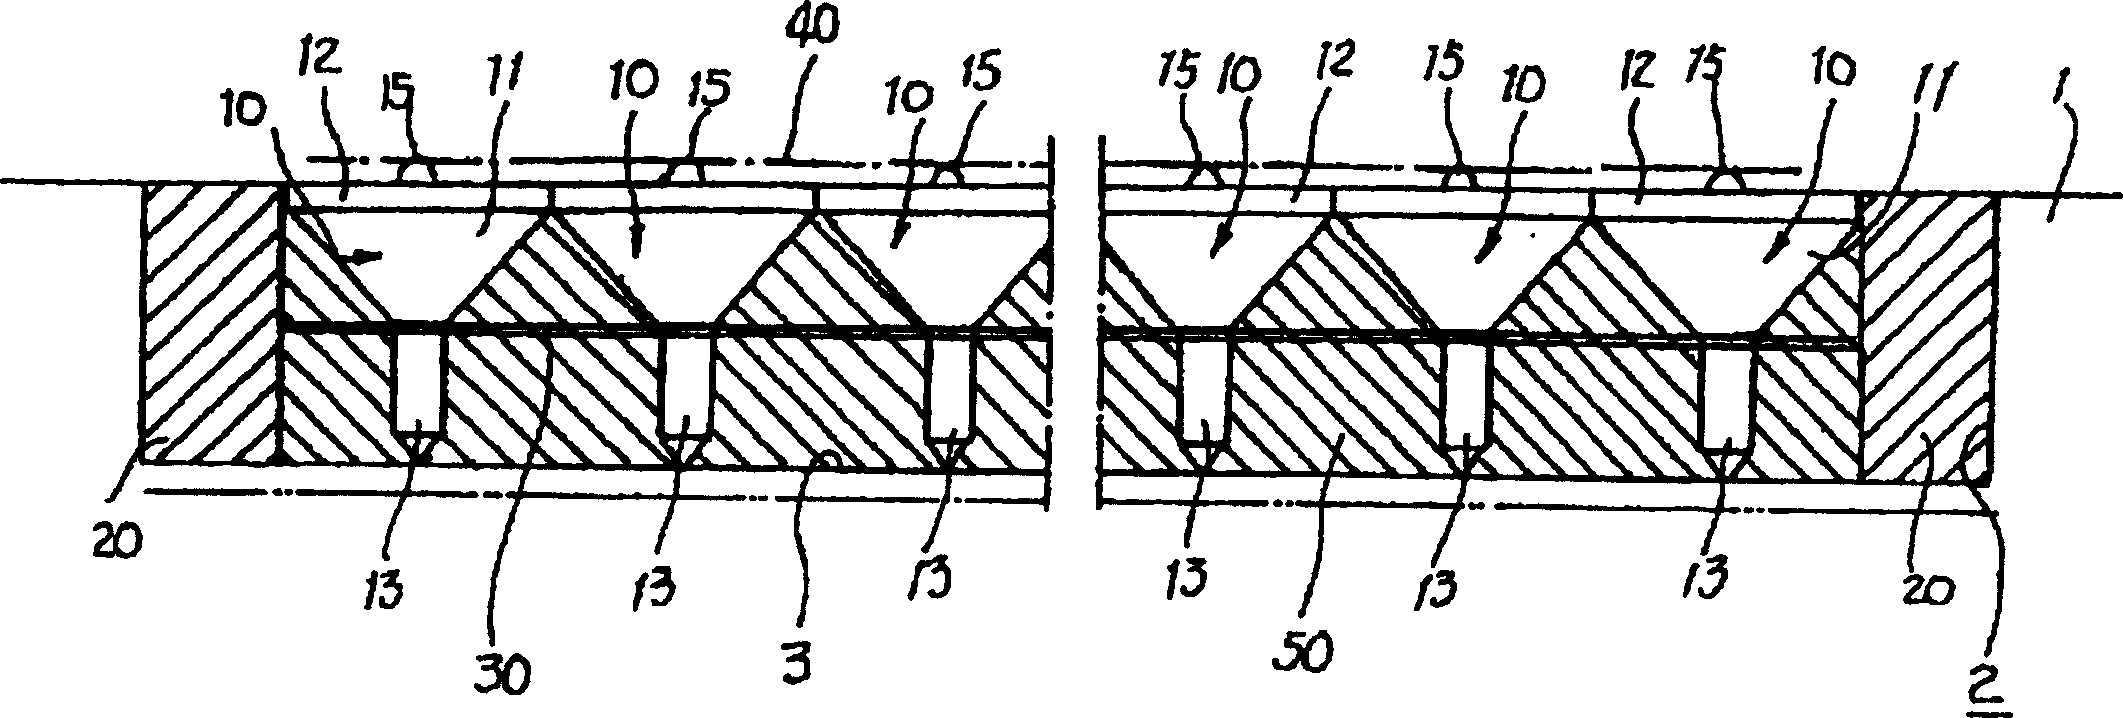 Base foundation construction method and building infrastructure